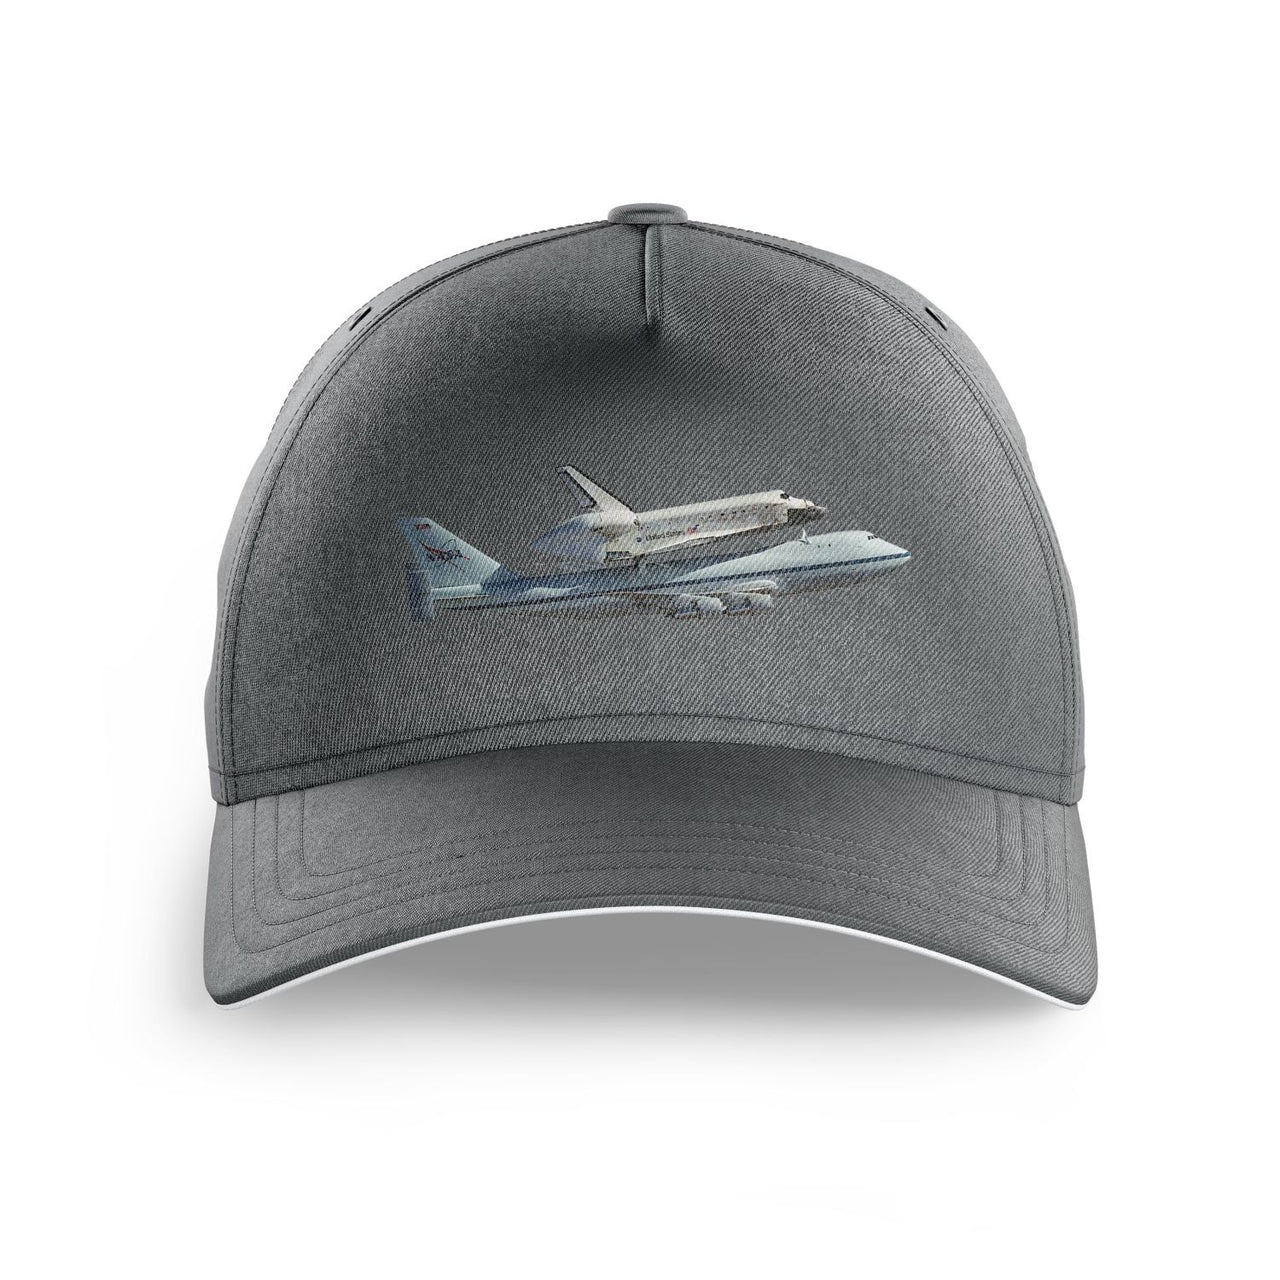 Space shuttle on 747 Printed Hats